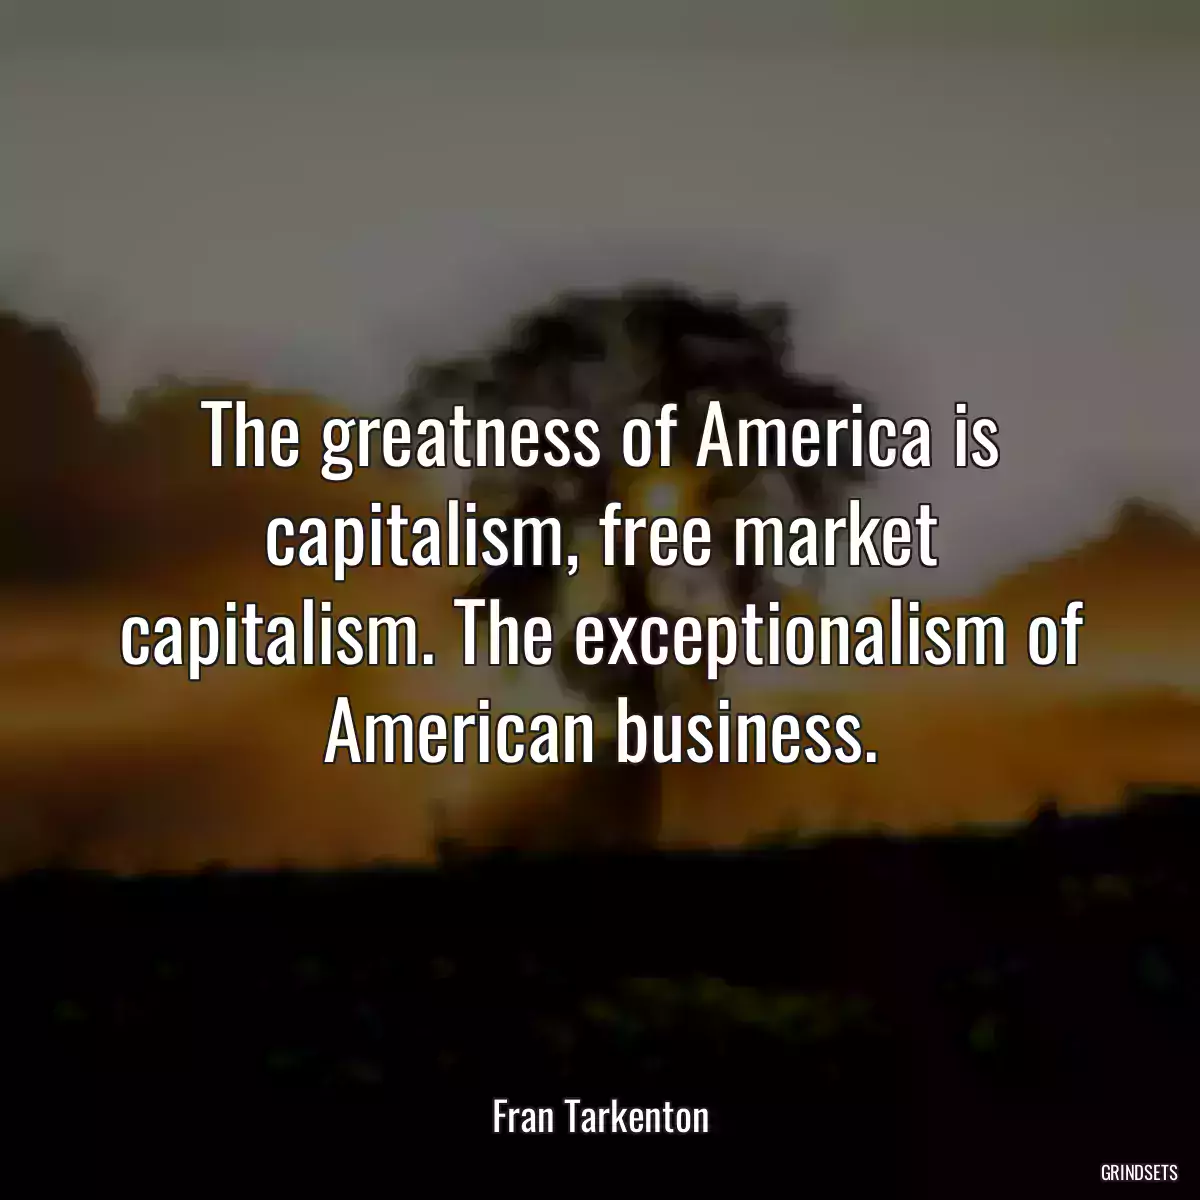 The greatness of America is capitalism, free market capitalism. The exceptionalism of American business.